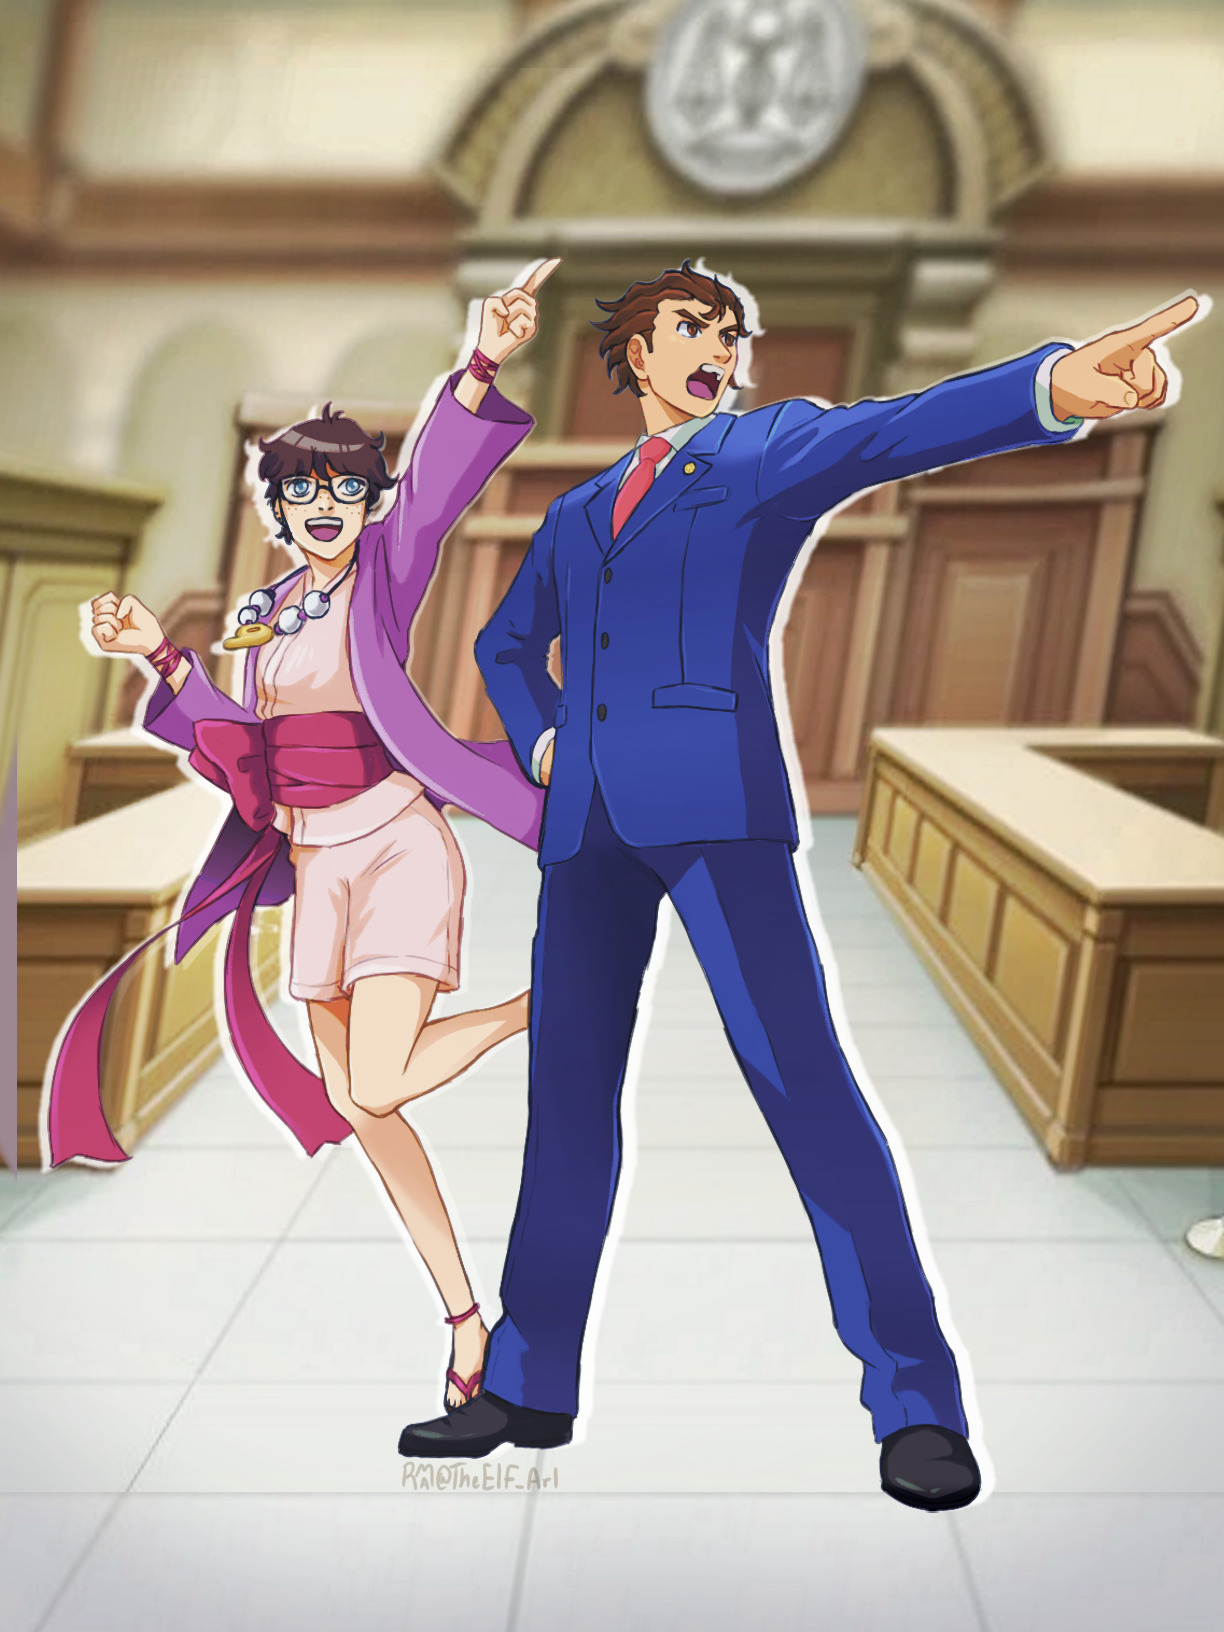 My friend has been playing through the ace attorney trilogy, so I drew us as the dynamic duo (which fits our 